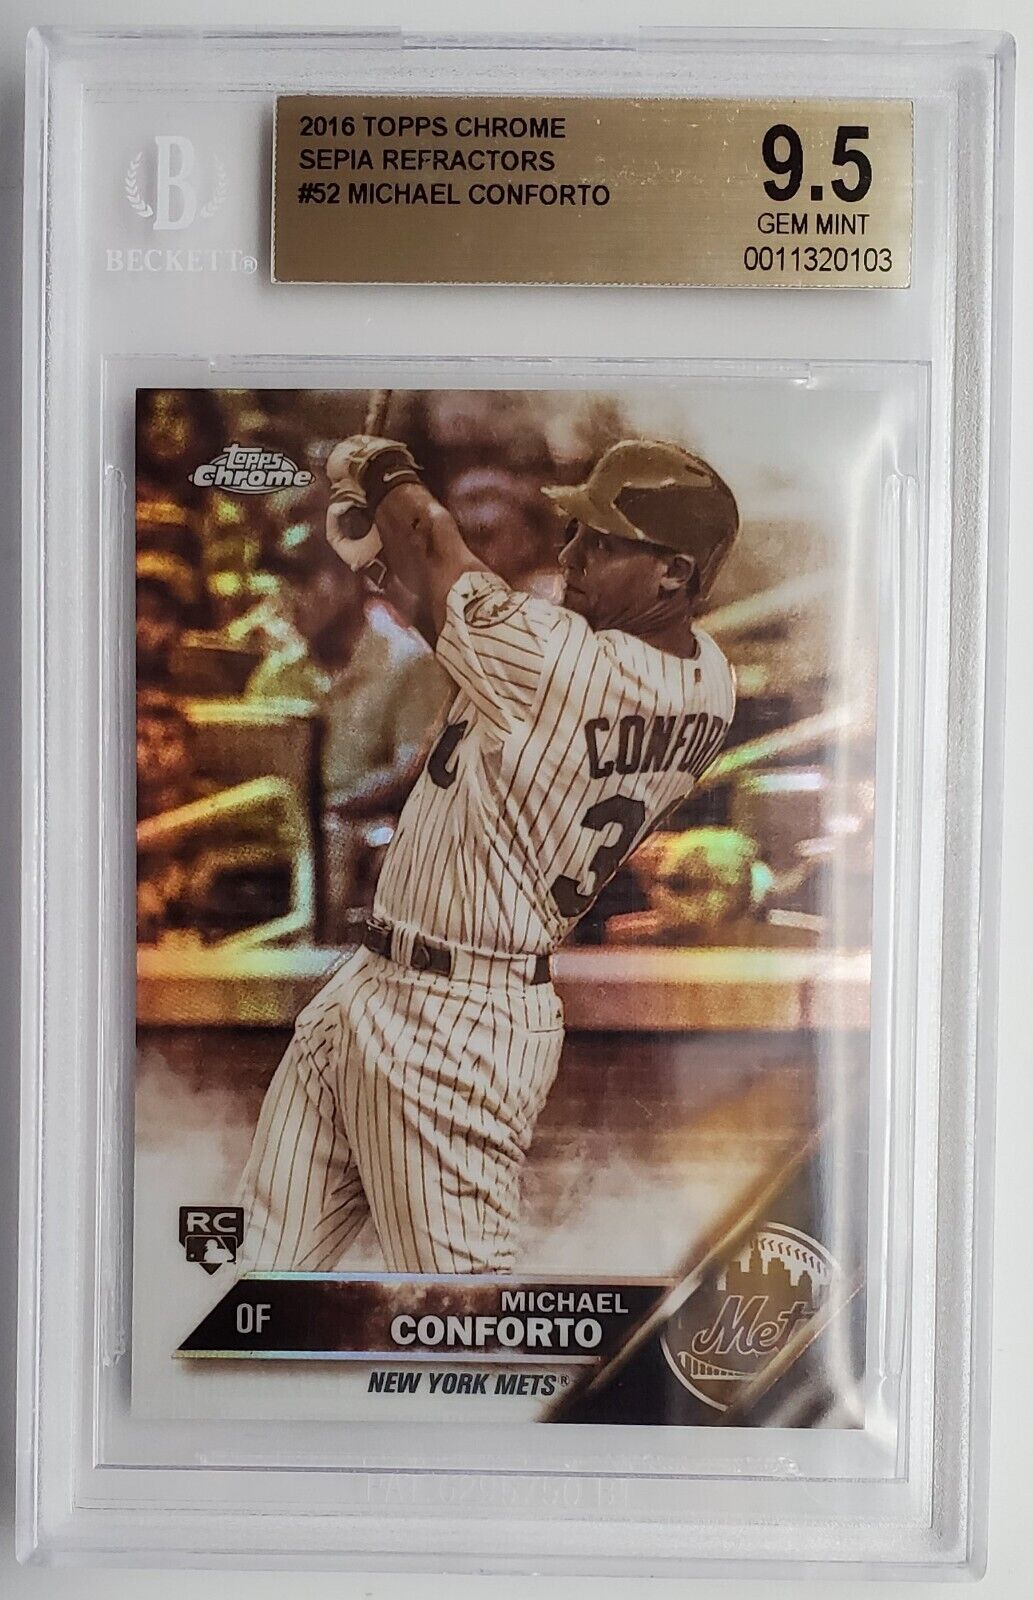 2016 Topps Chrome SEPIA Refractor Michael Conforto Rookie Card BGS 9.5 GEM Mint. rookie card picture